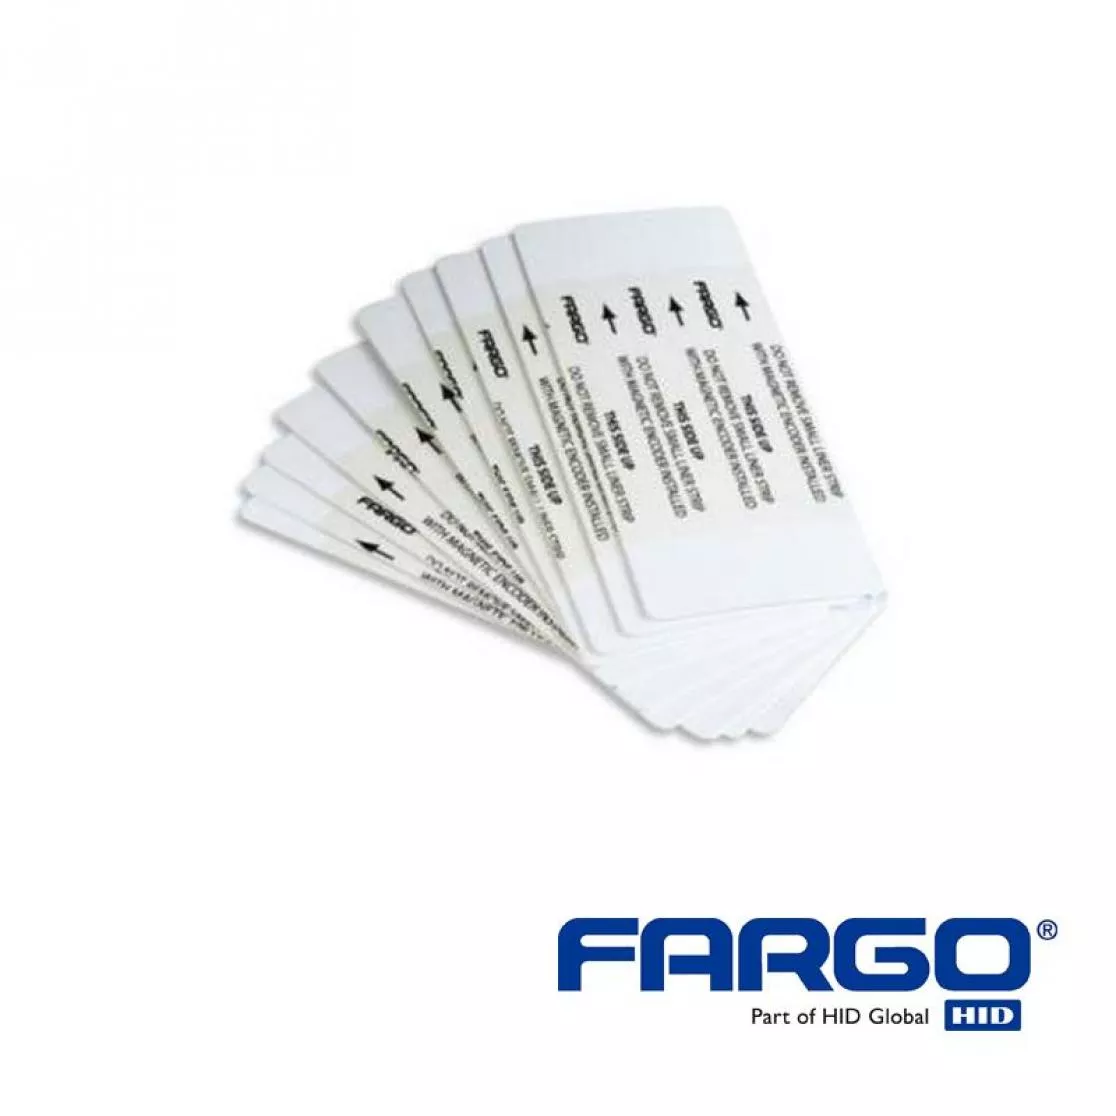 HID Fargo DTC1500e cleaning cards